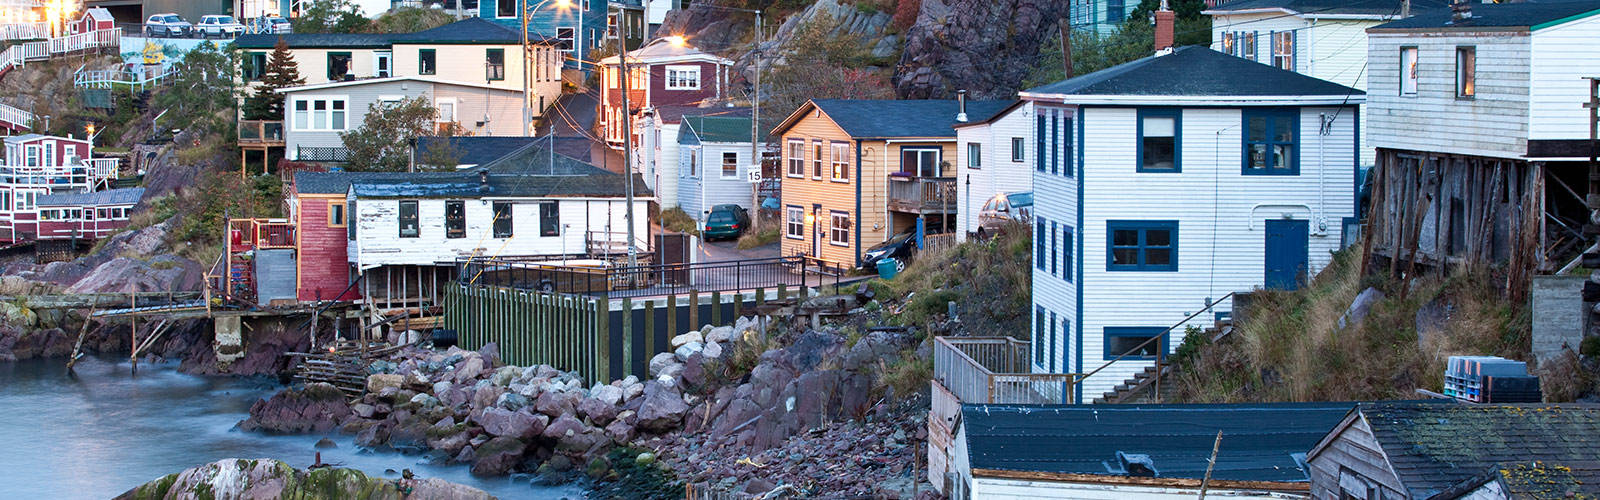 A Peaceful Town In Newfoundland Wallpaper